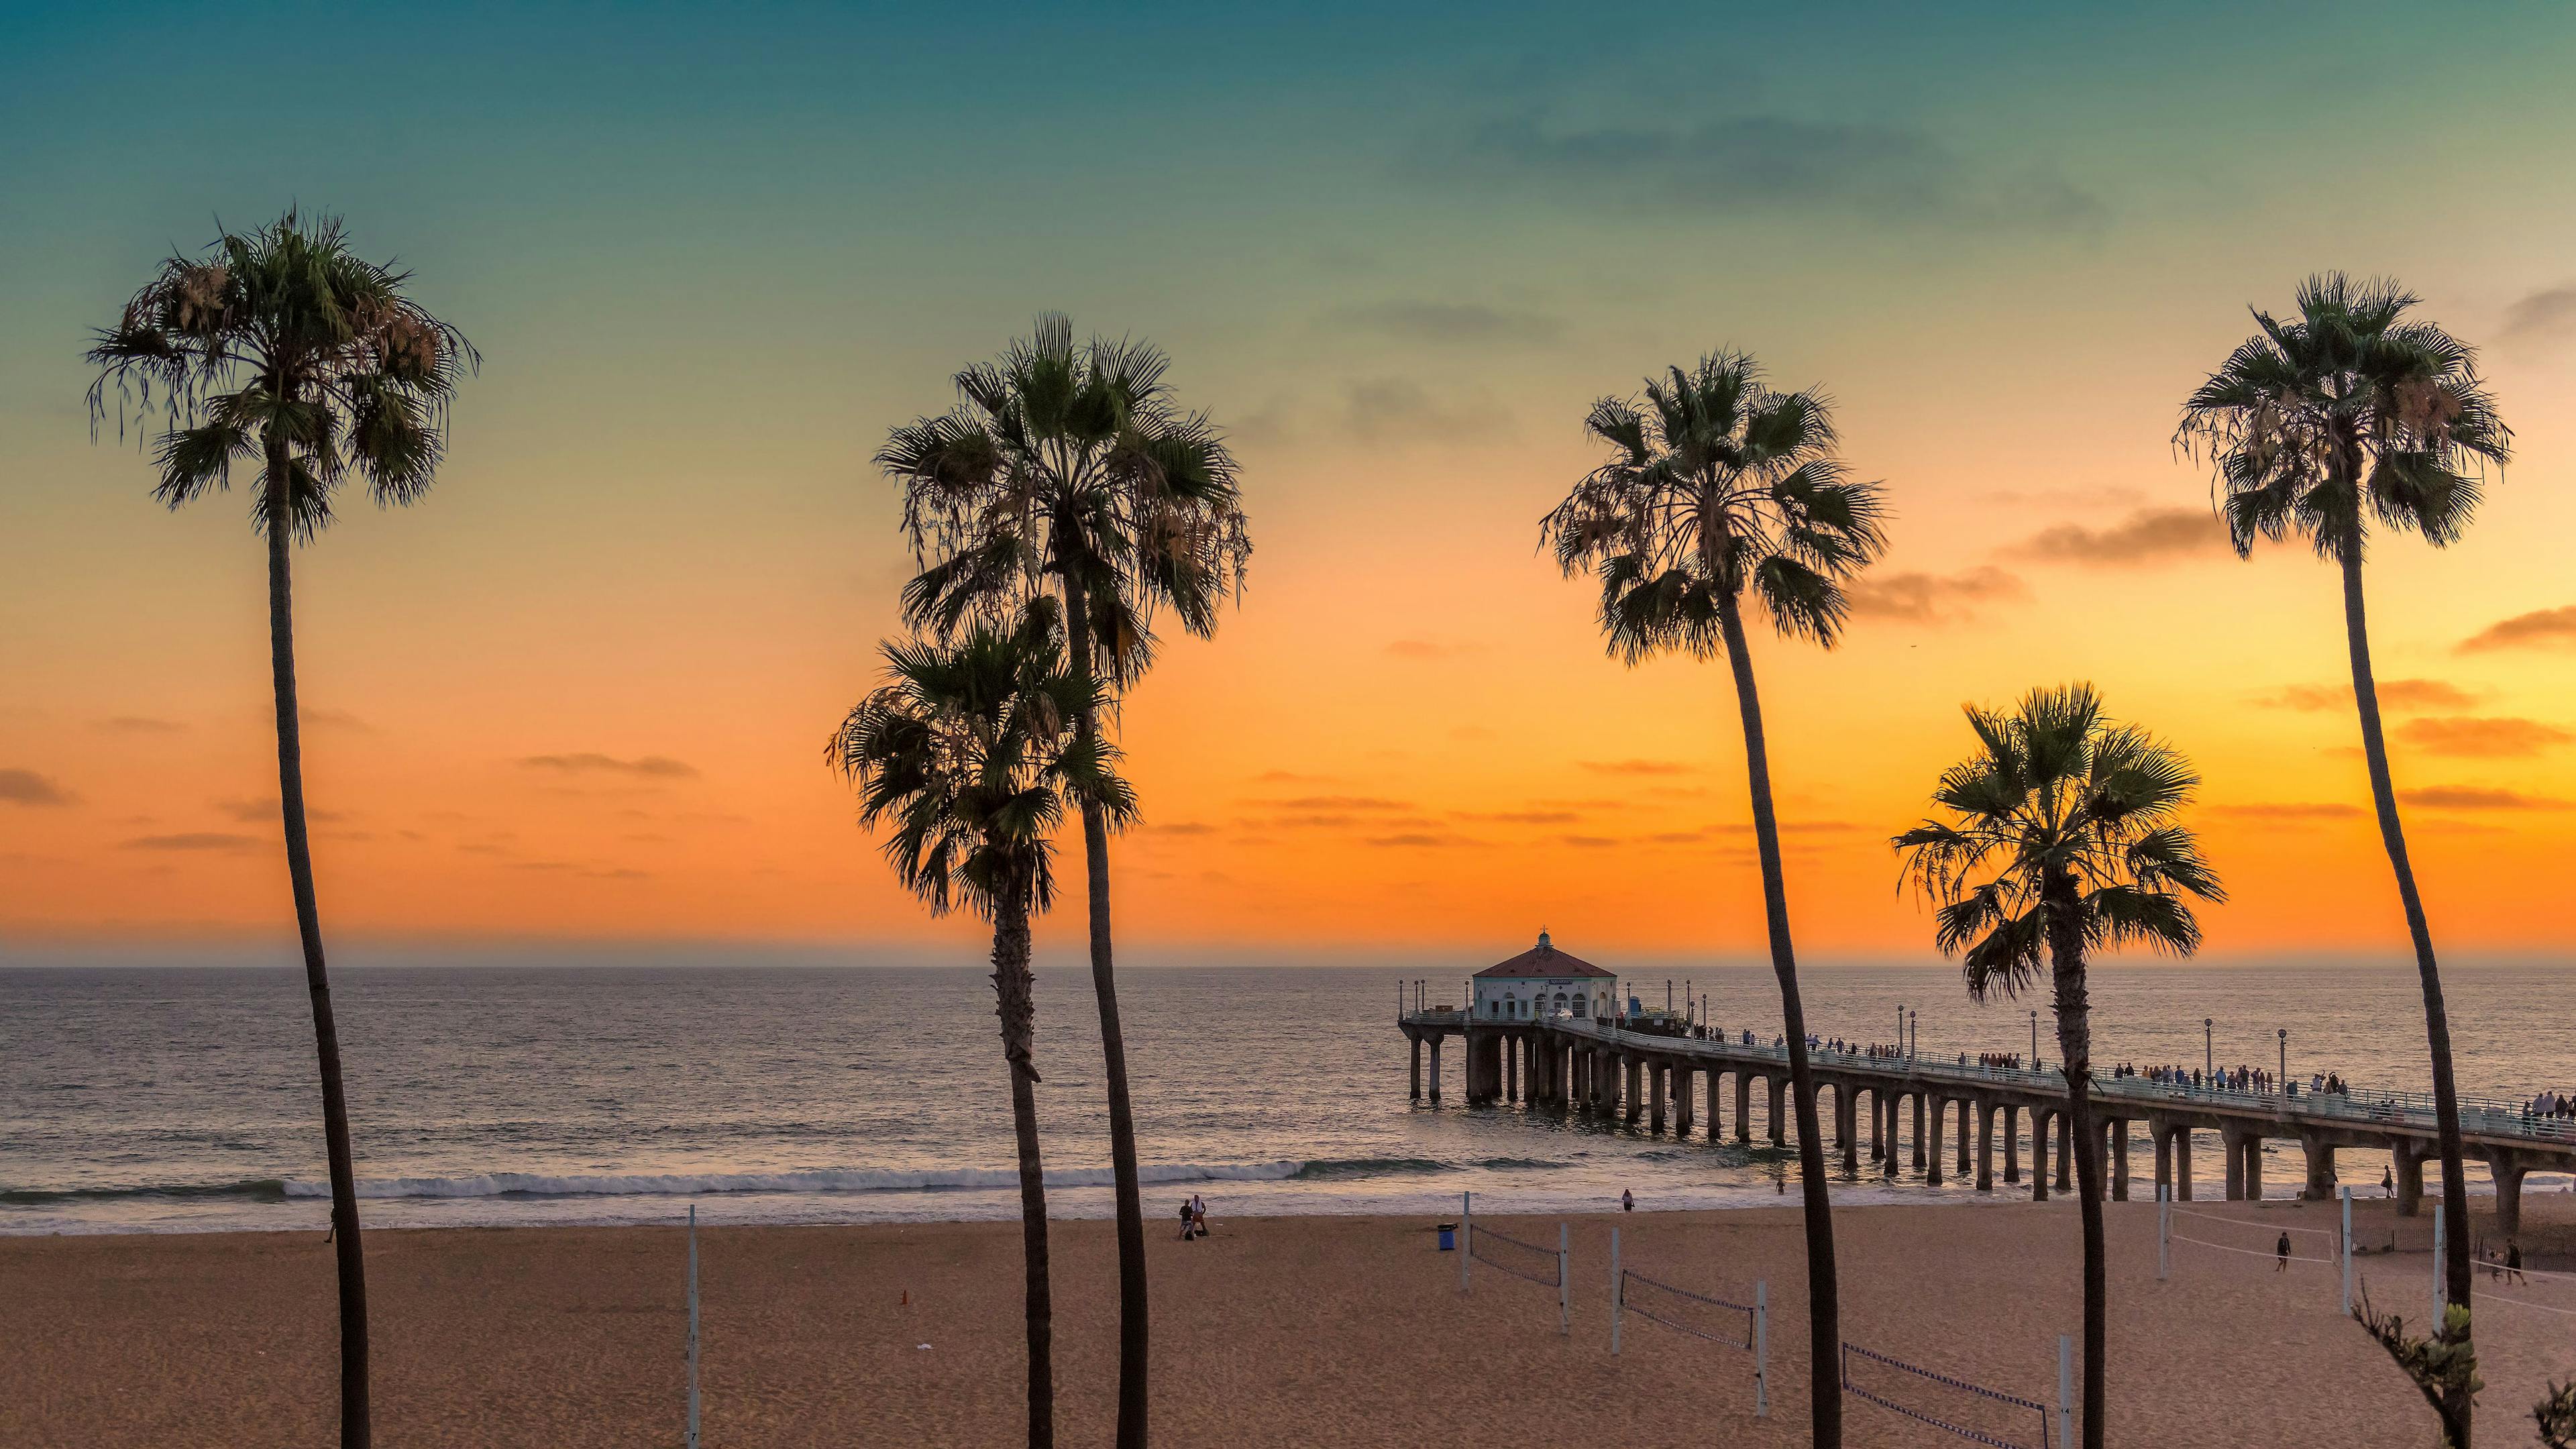 The president of the San Diego Psychiatric Society gives us a glimpse into the city for the upcoming 2022 Annual Psychiatric Times World CME Conference.